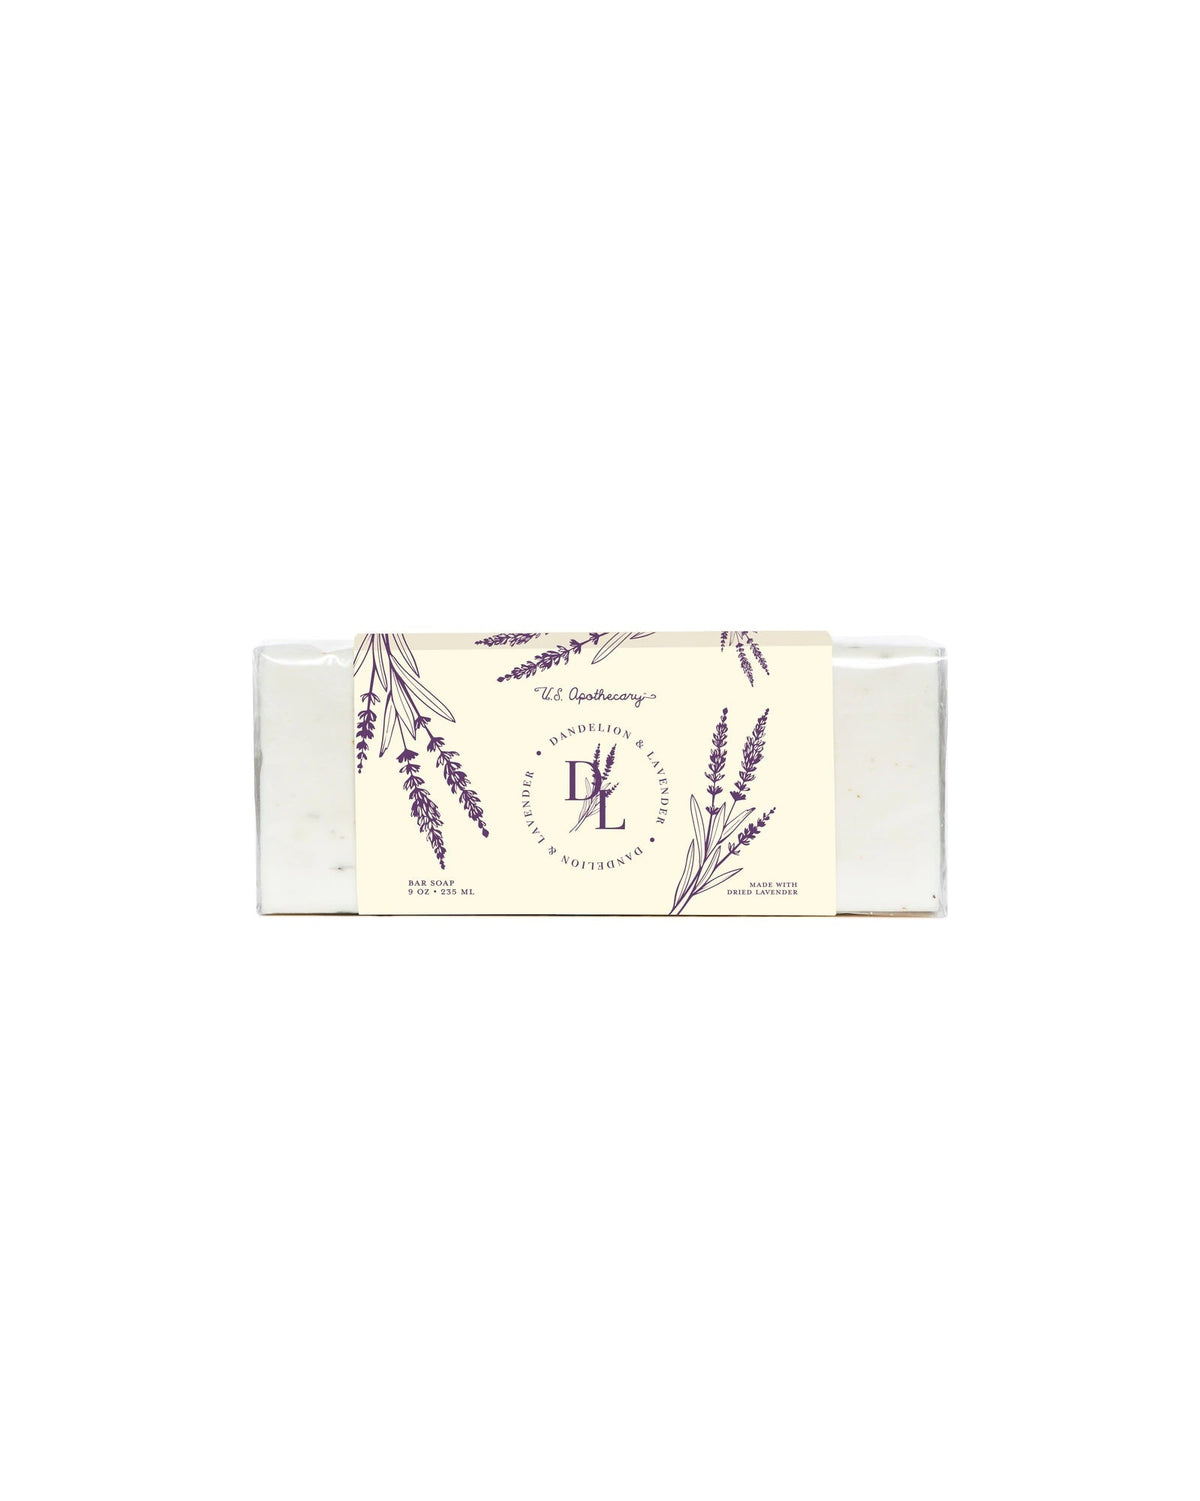 A bar of U.S. Apothecary Dandelion & Lavender Triple-Milled Bar Soap in a white box with lavender illustrations and elegant script text that includes the words "le grandeur," the logo "le," and descriptions in English and French